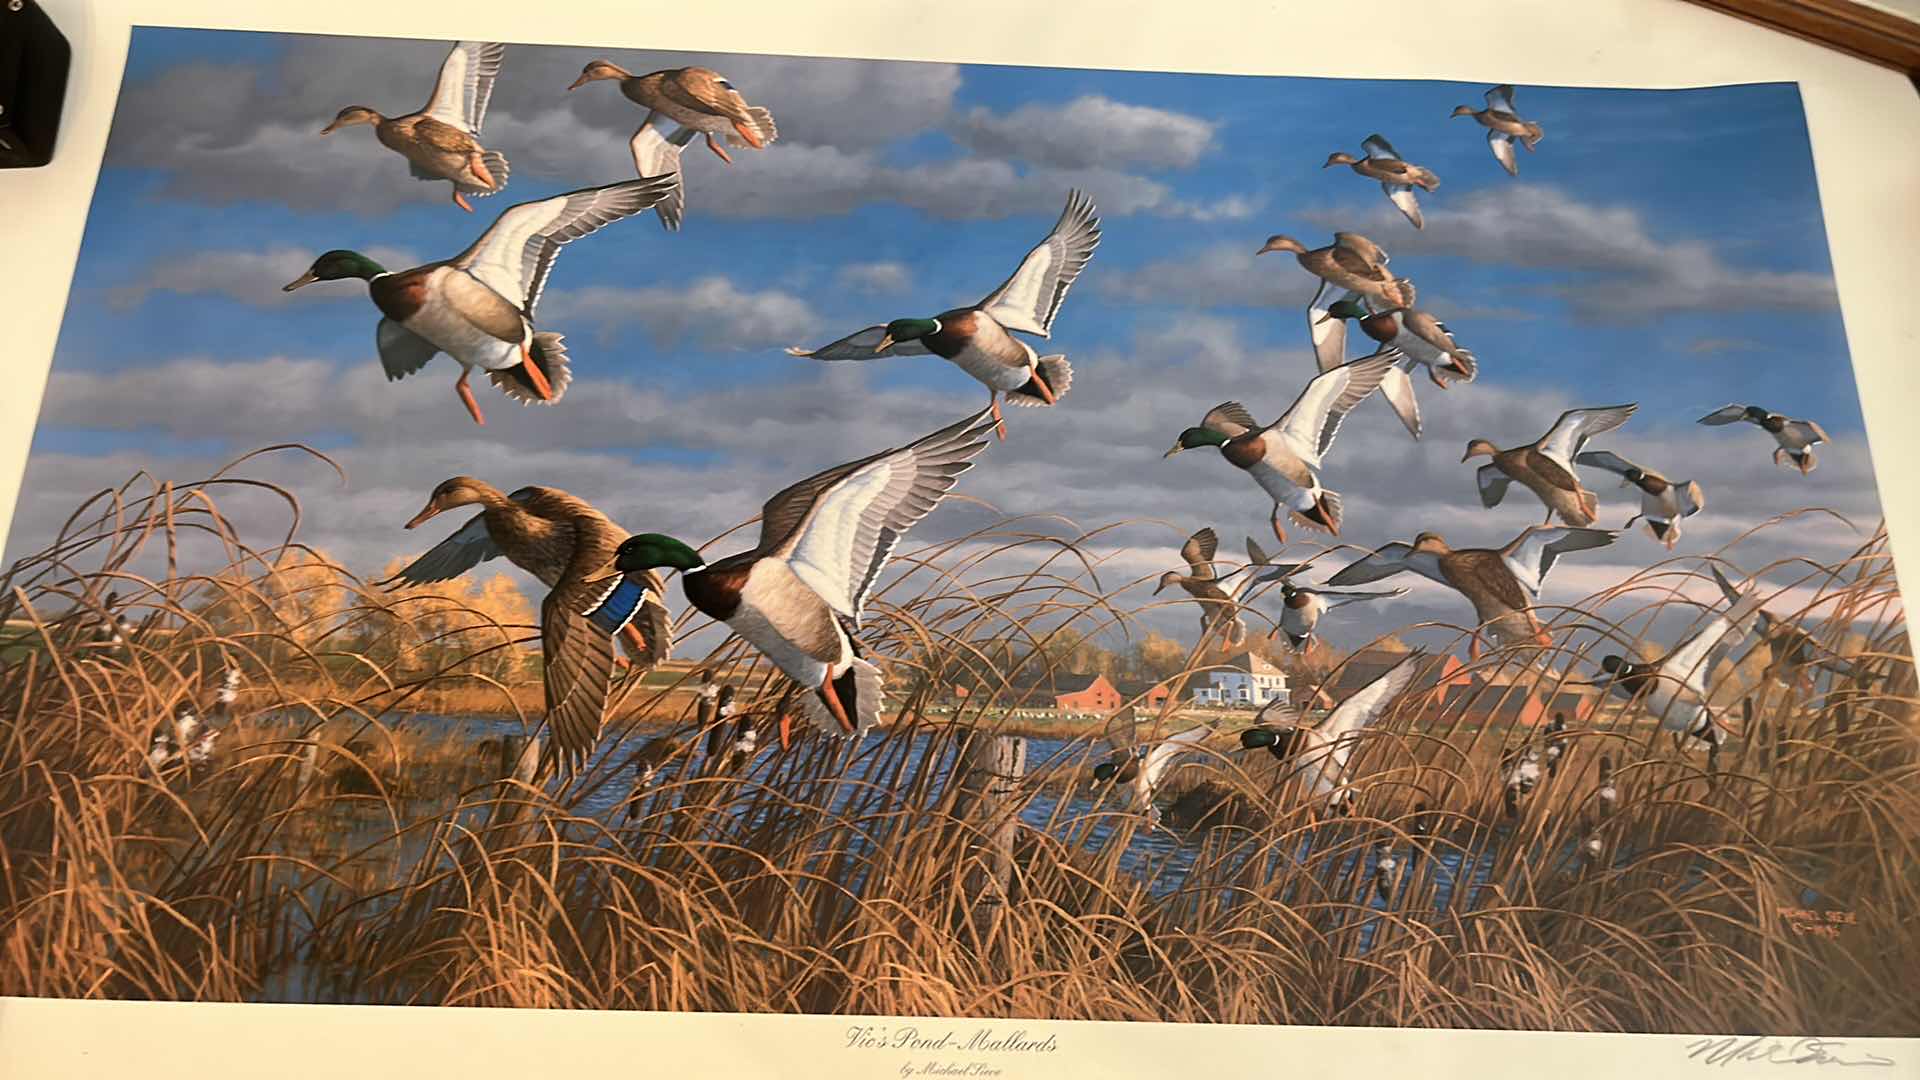 Photo 1 of SIGNED NUMBERED PRINT “VICS POND MALLORDS, ARTWORK 31” x 20”